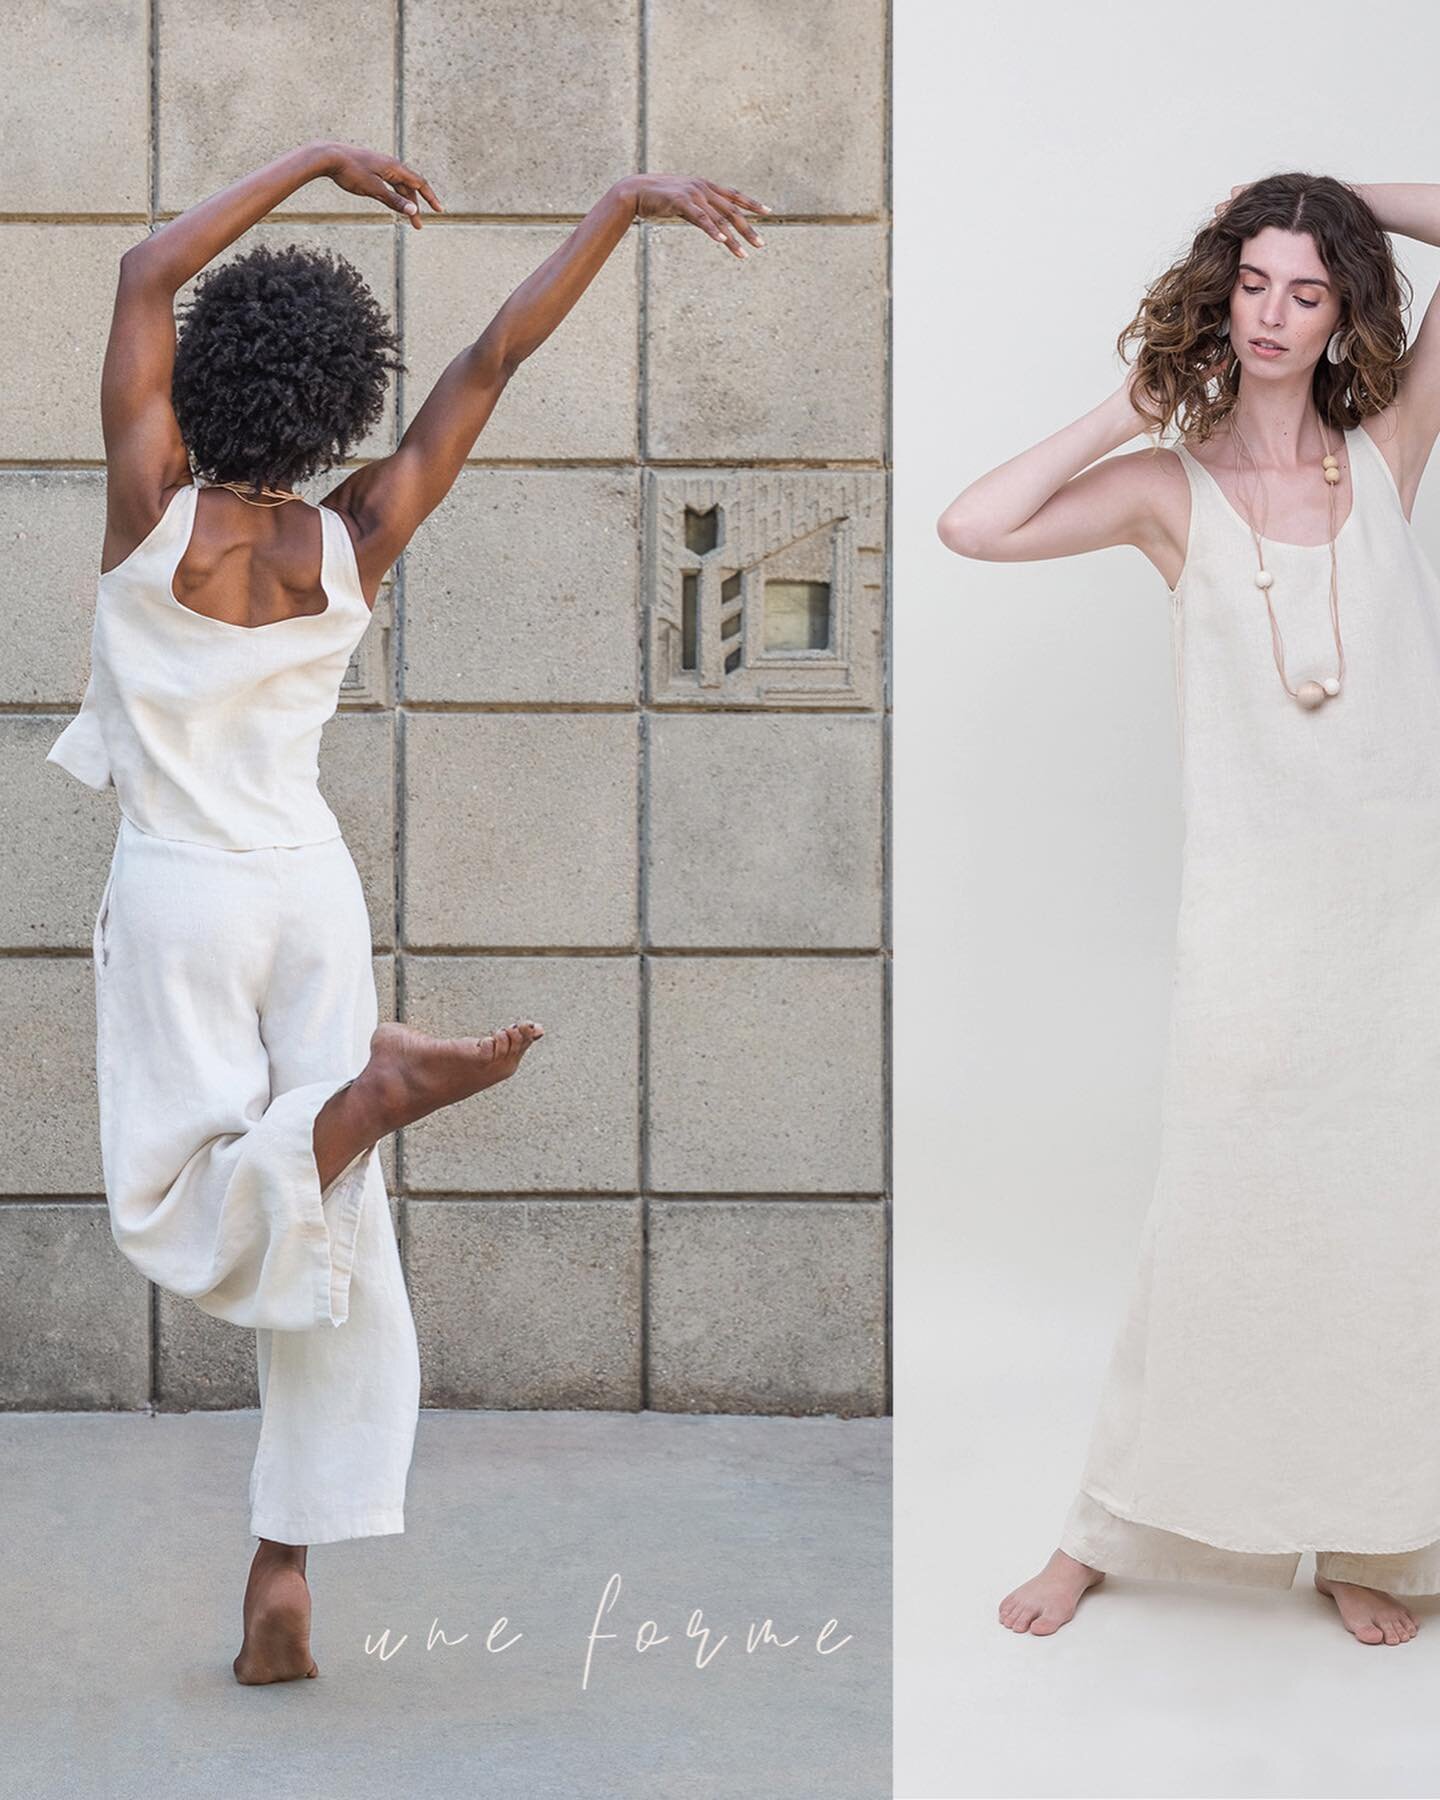 The brand new @une__forme spring collection has arrived. I am honored to be a part of this beautiful slow fashion, sustainably made in LA , for women by women, right from beginning. Watching you grow  and blossom @unitsofunits has been a joy and I ca